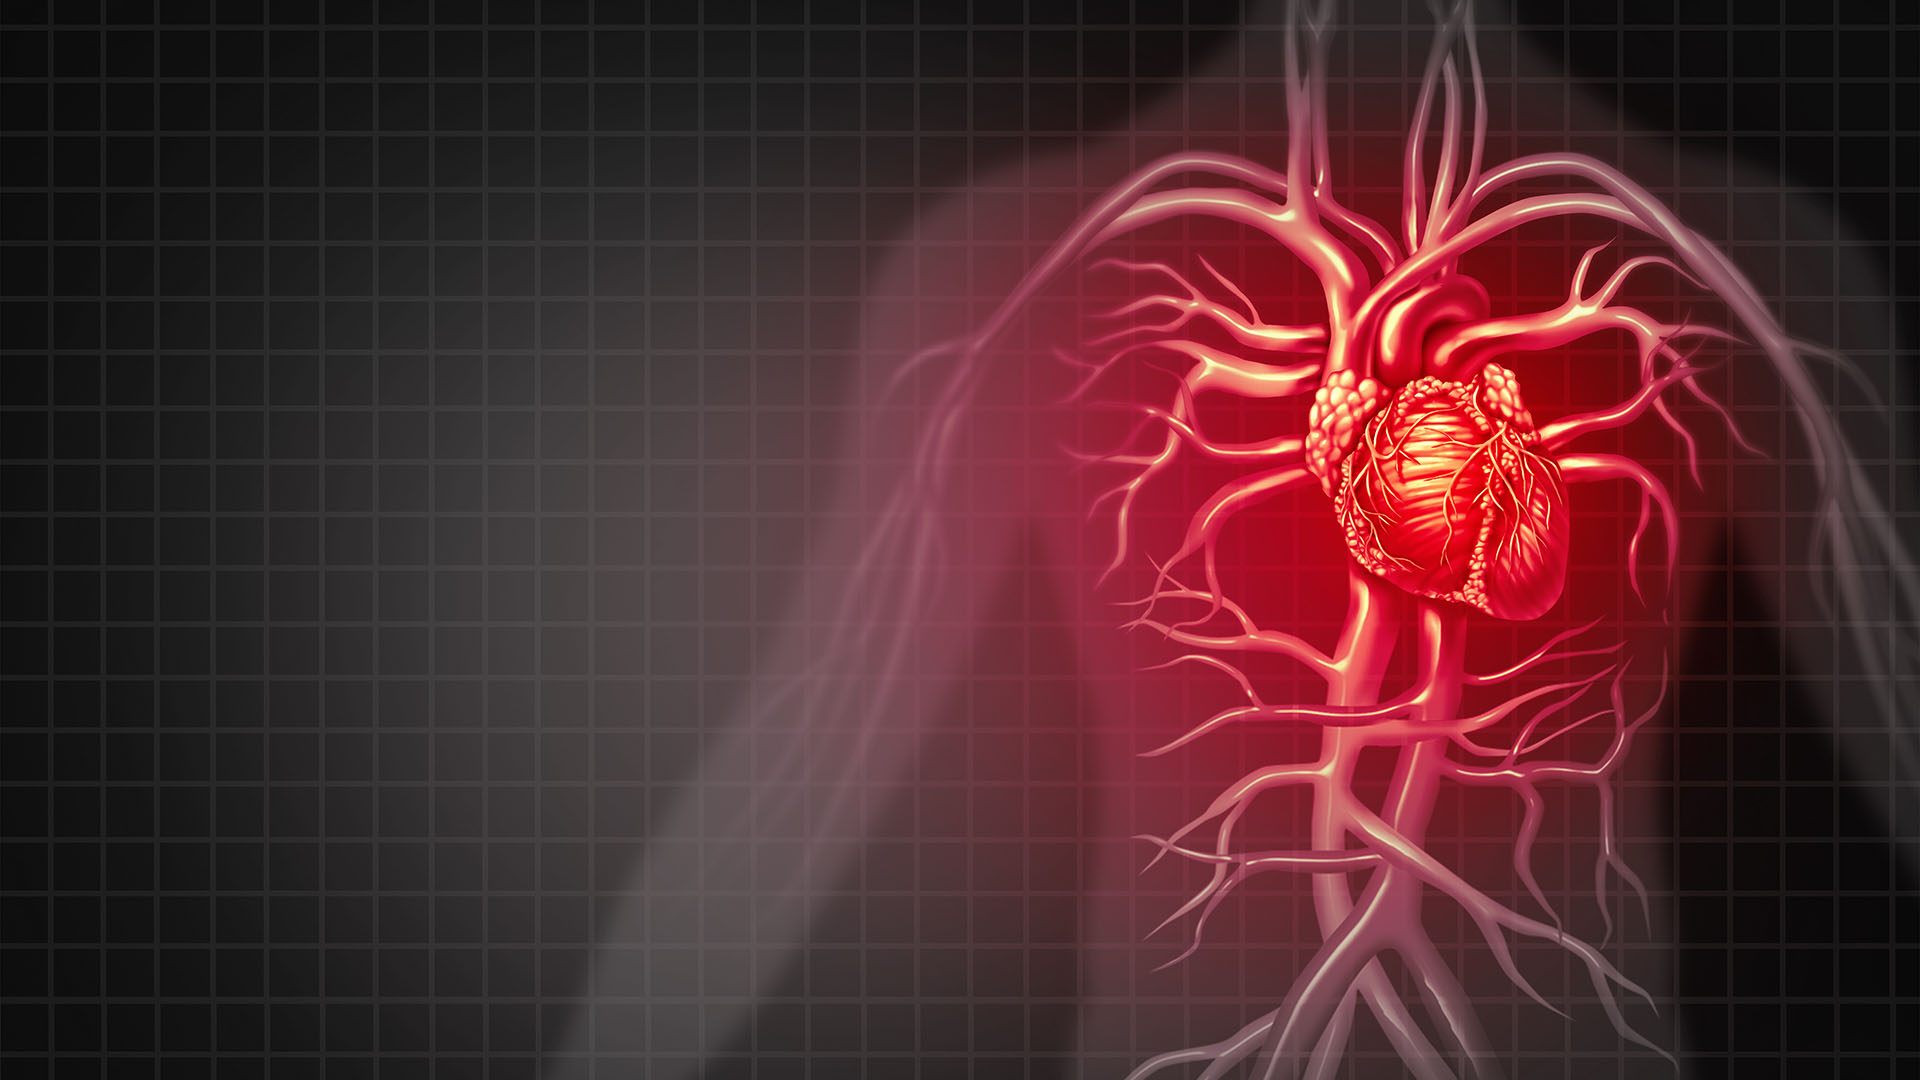 Heart attack and chest pain medical cardiovascular disease as an illness of a human circulation organ in a 3D illustration style.